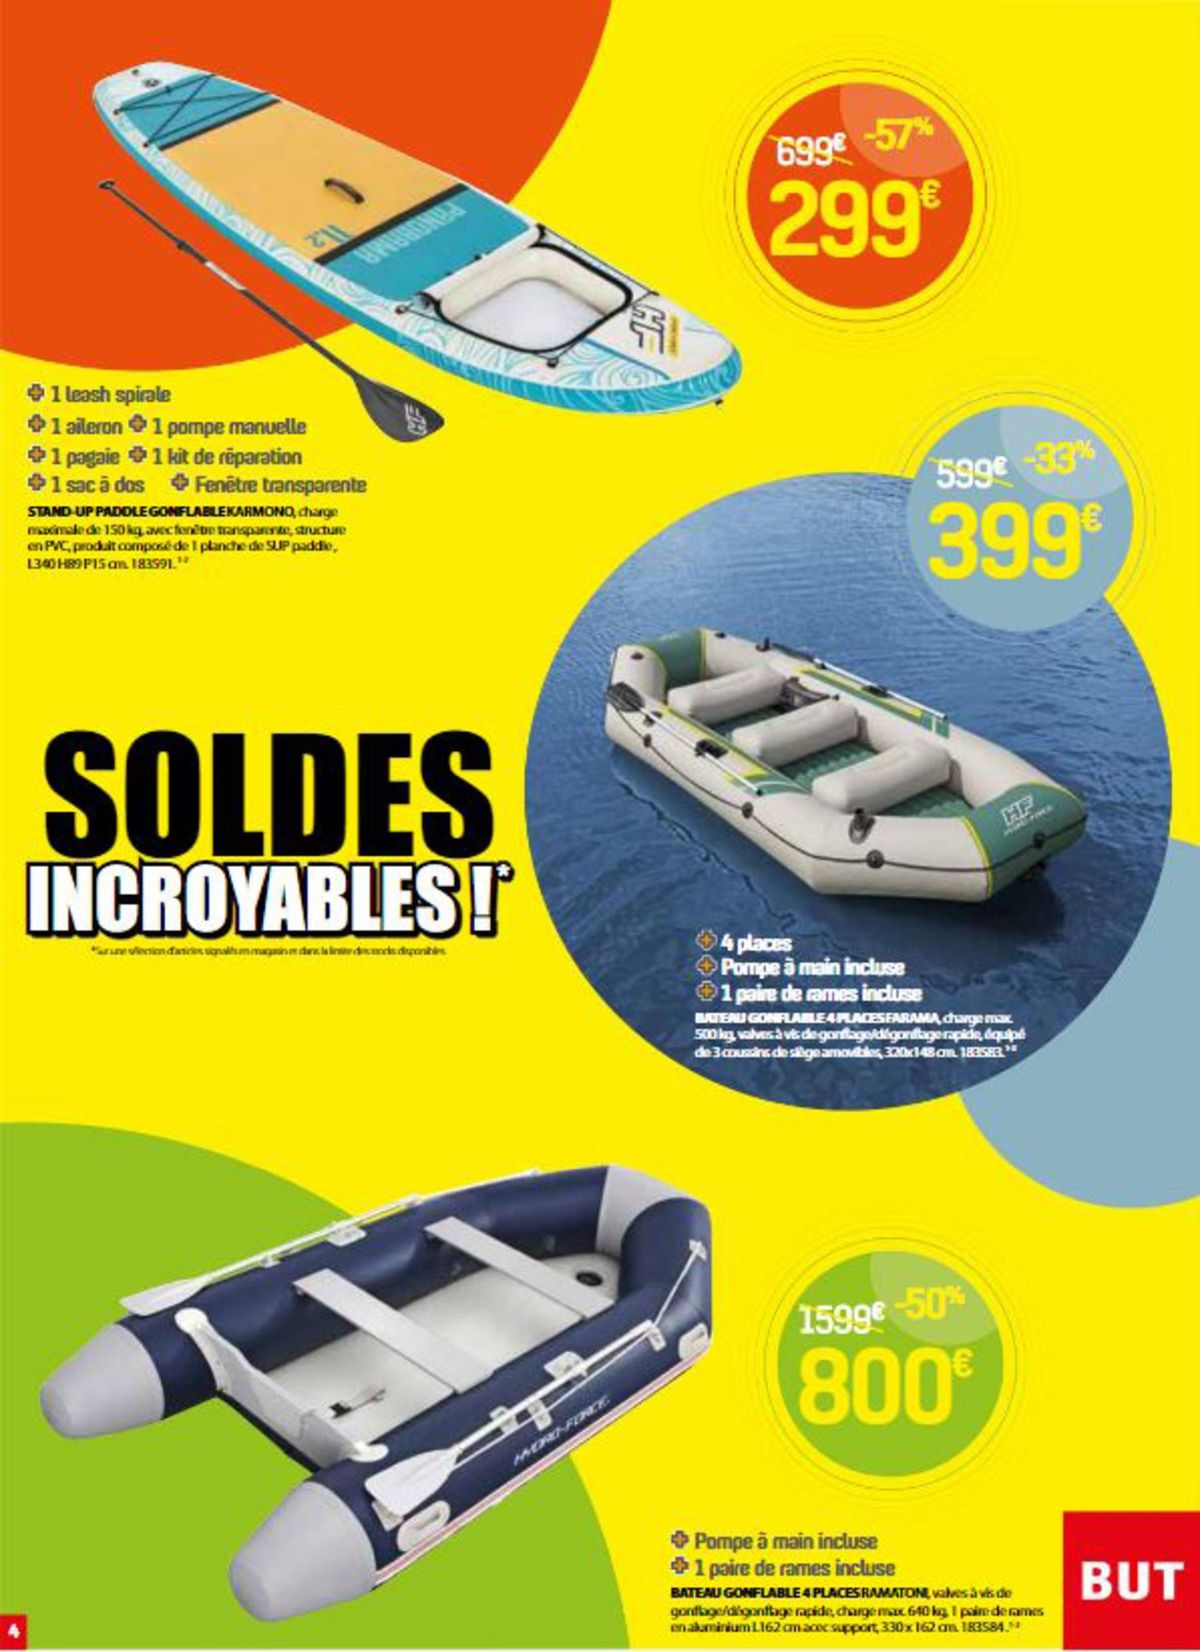 Catalogue Soldes incroyables !, page 00004